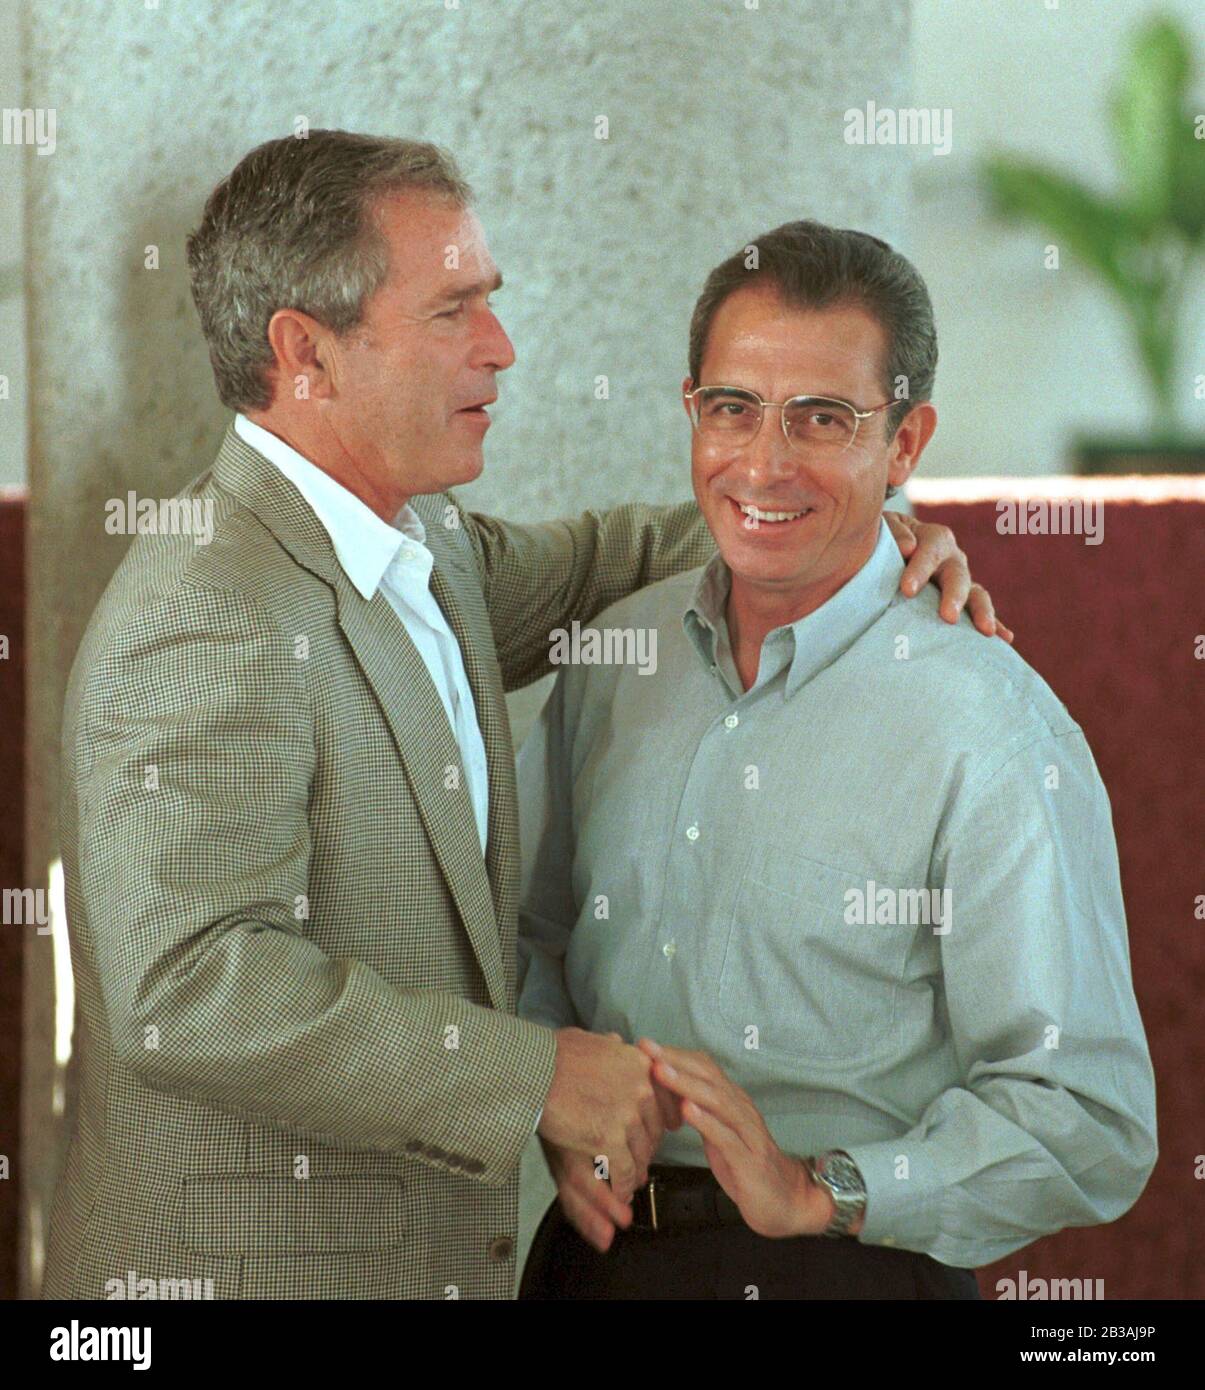 Eagle Pass, Texas USA, 03 SEP 1999:  Texas Governor George W. Bush and Mexican President Ernesto Zedillo greet each other at the Camino Real International Bridge in Piedras Negras, Mexico before the start of dedication ceremonies to open the bridge between Texas and Mexico. ©Bob Daemmrich Stock Photo